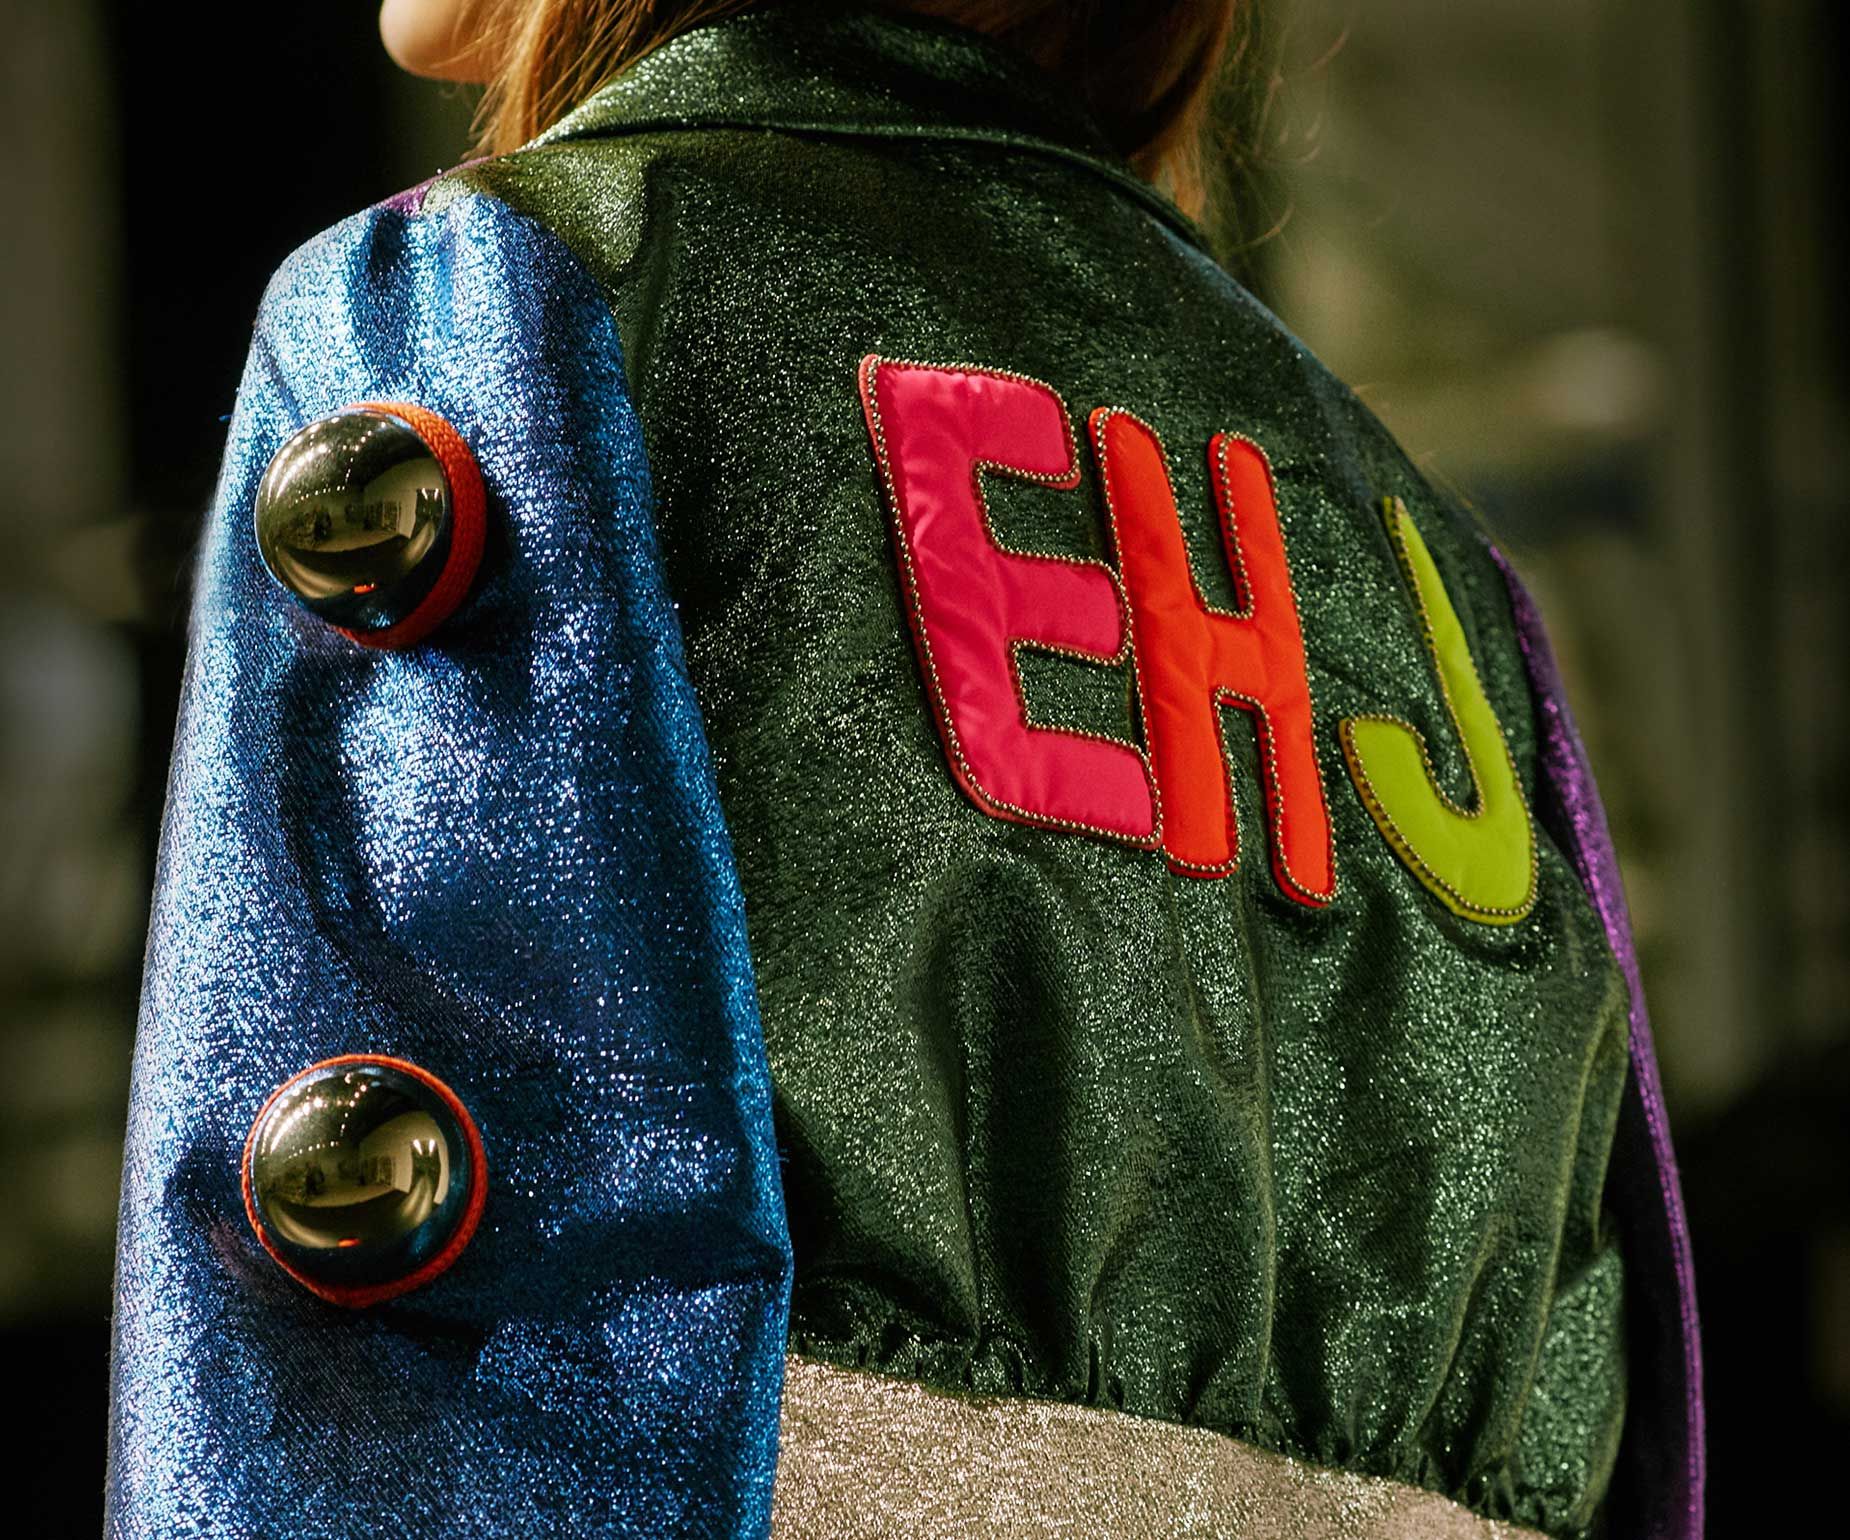 Sequins, Sunglasses and Shell Suits - Elton inspires Gucci's Spring/Summer 2018 collection